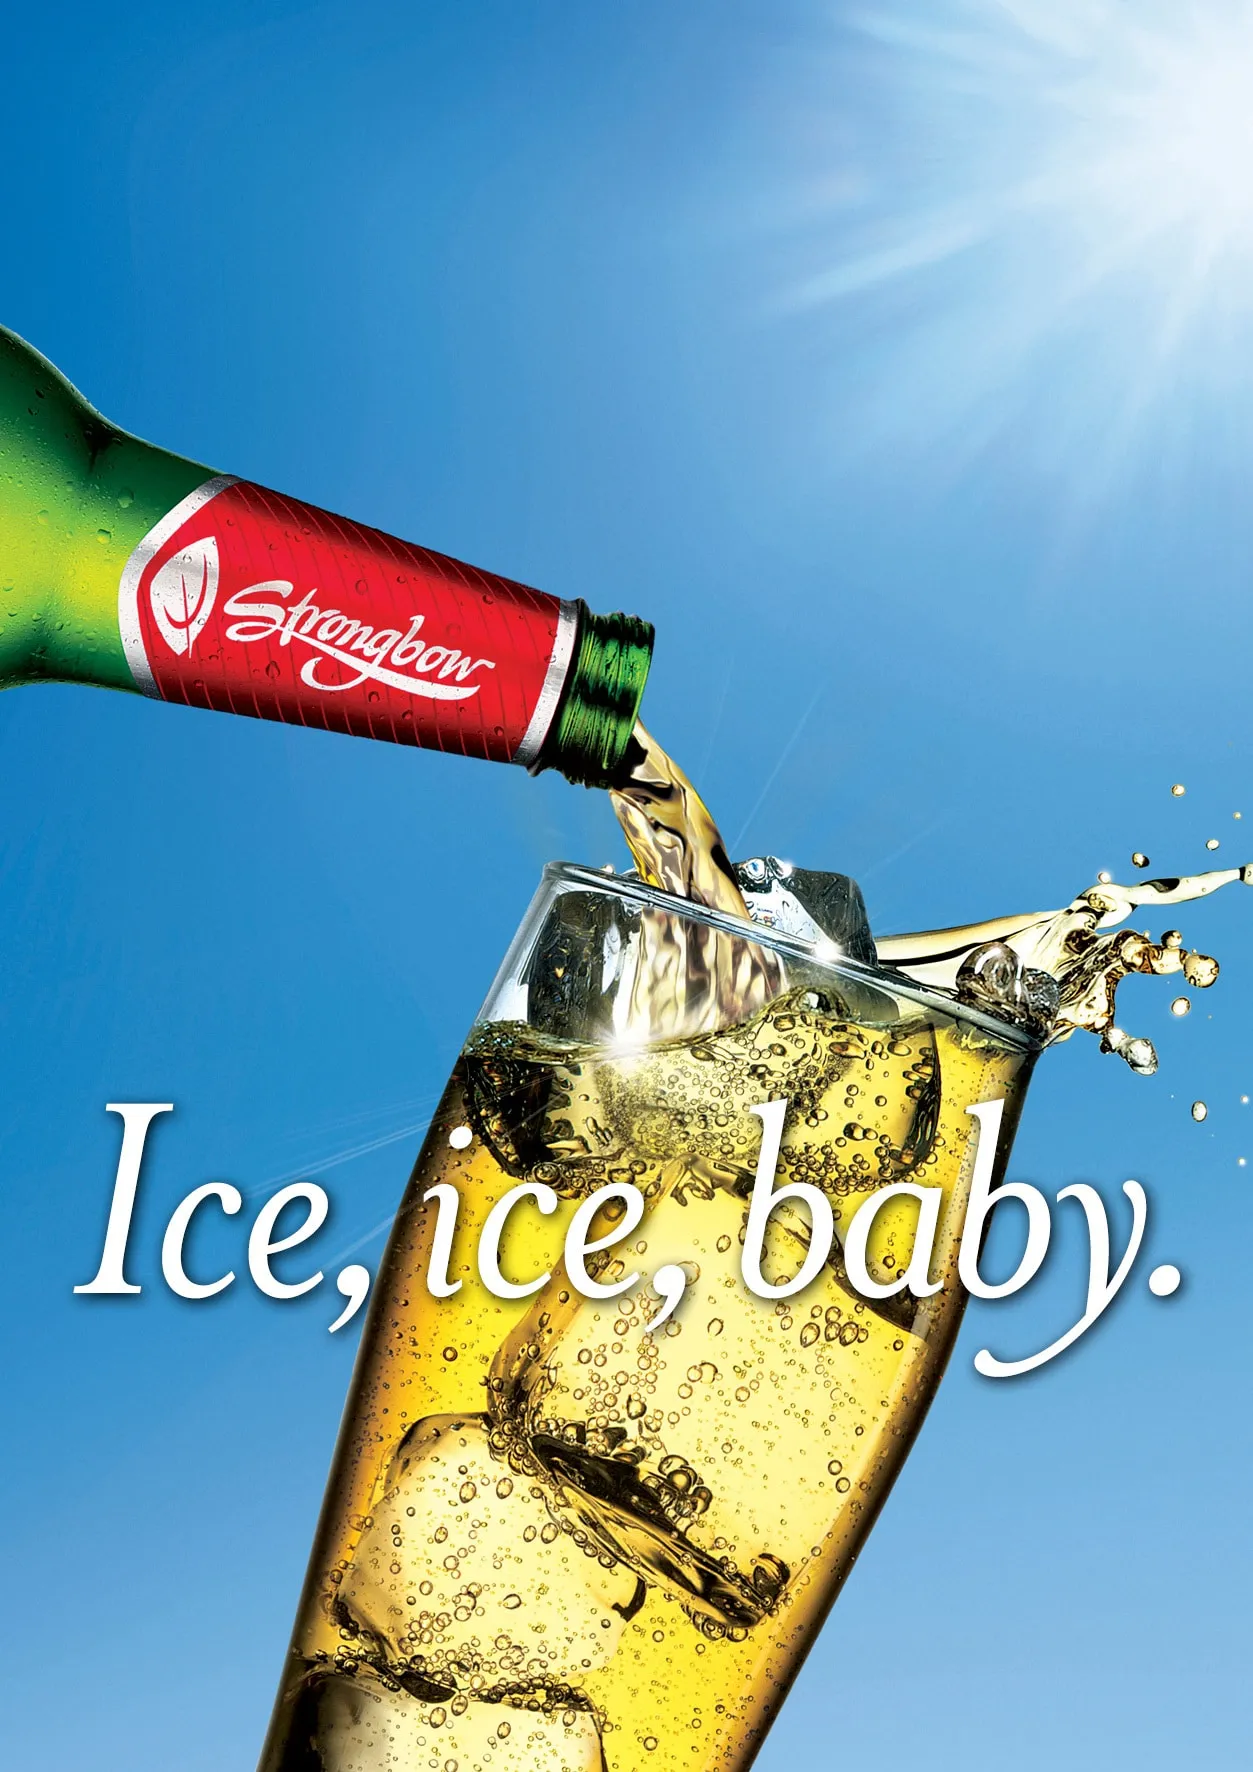 An outdoor poster for Strongbow that says "Ice, Ice, Baby" and shows cider being poured into a glass in summer